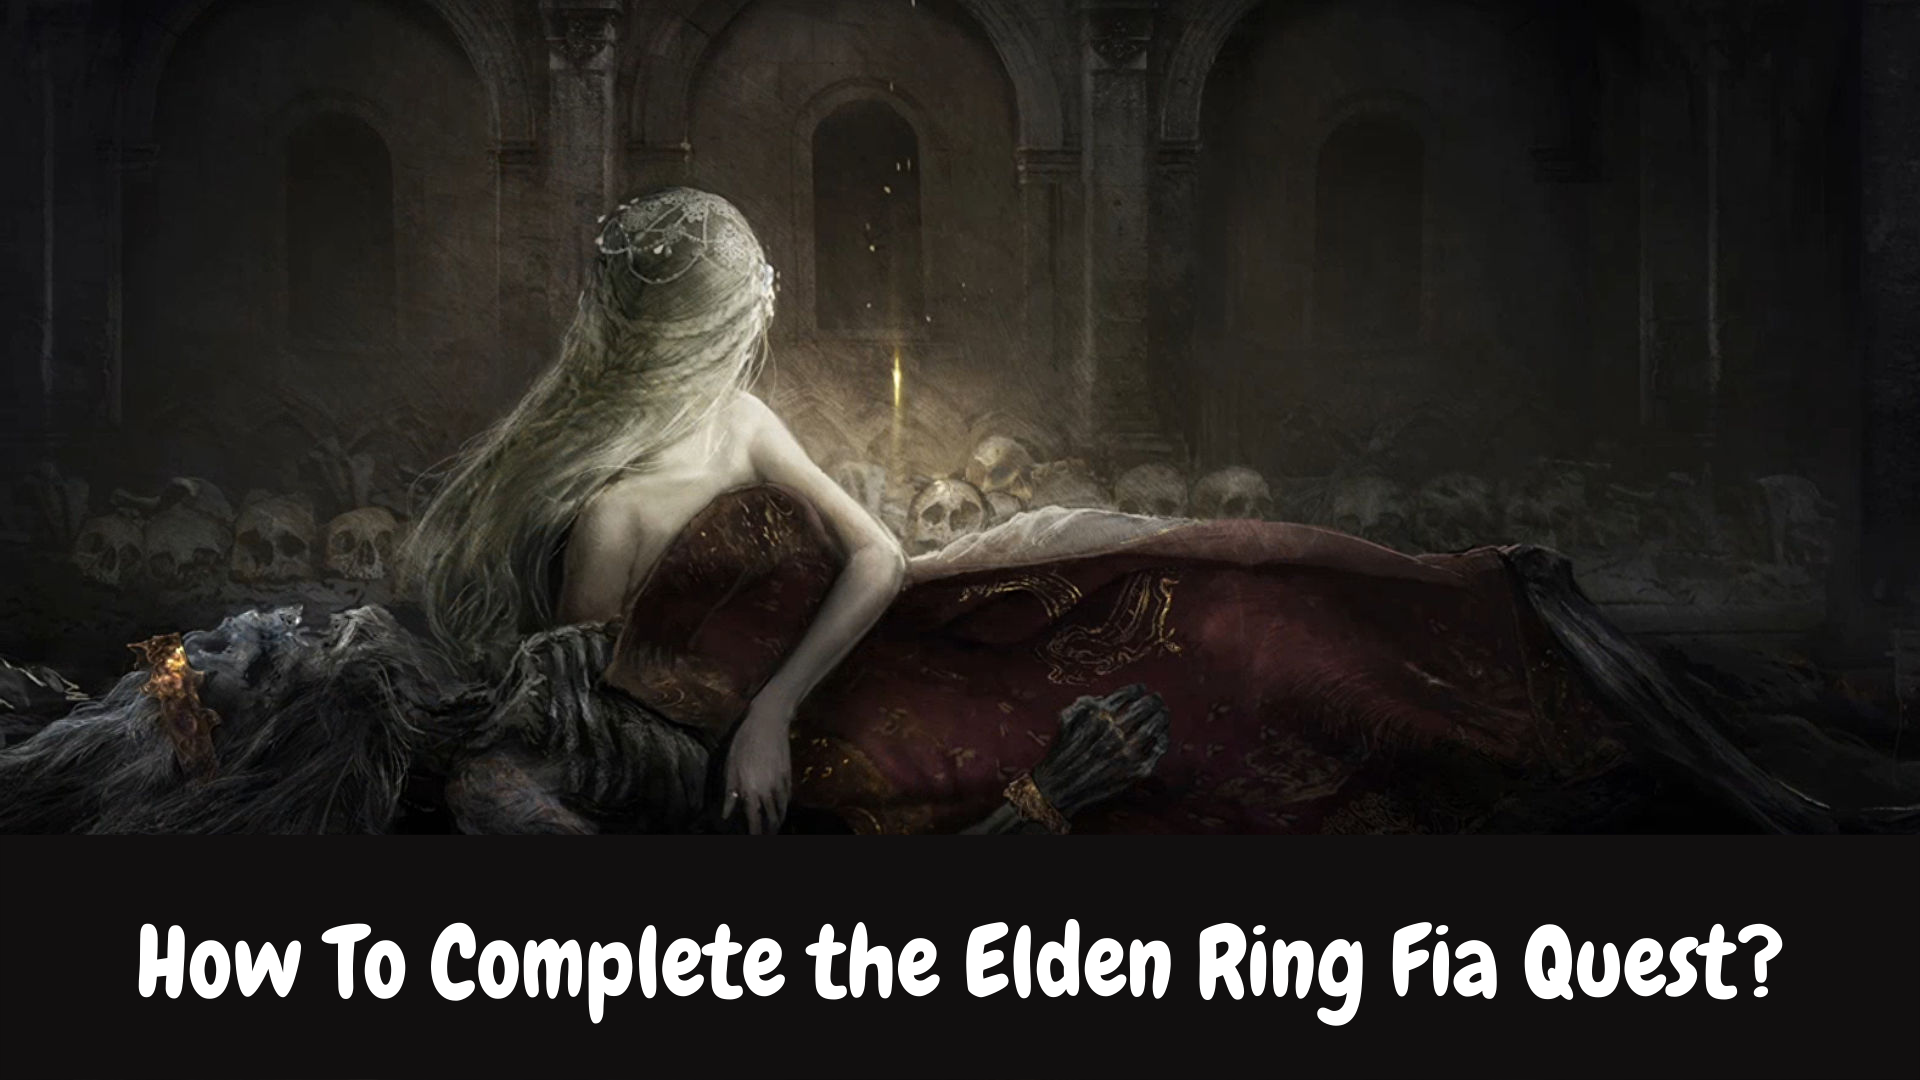 How To Complete the Elden Ring Fia Quest?